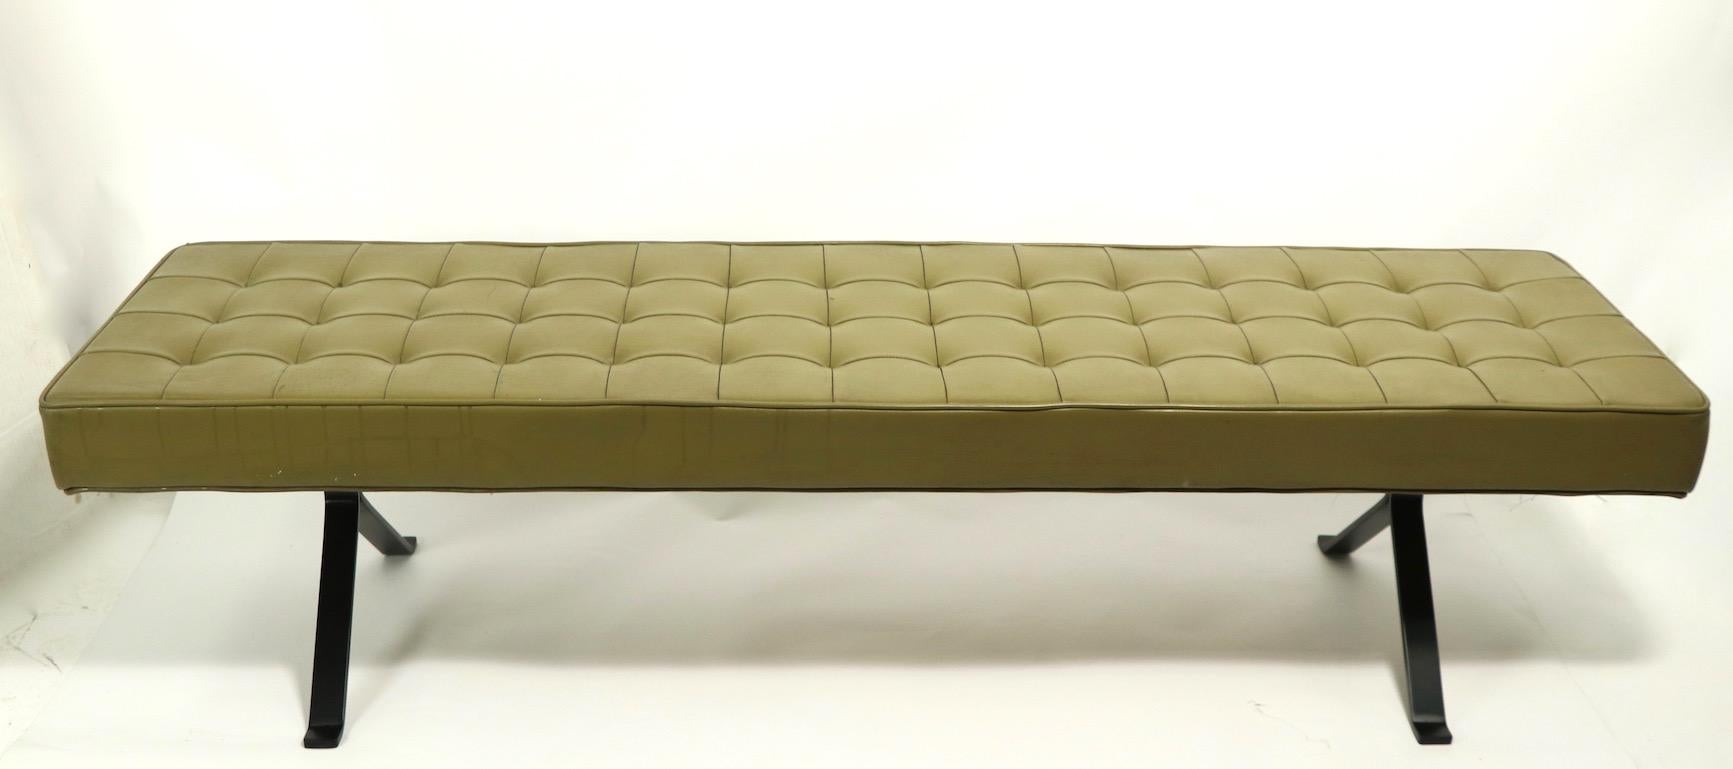 Stylish Mid Century bench having an upholstered top on inverted Y shaped metal legs. The top is of green vinyl, which shows some cosmetic wear, the legs are heavy solid metal, newly powder coated in semi gloss black. In the style of Milo Baughman,